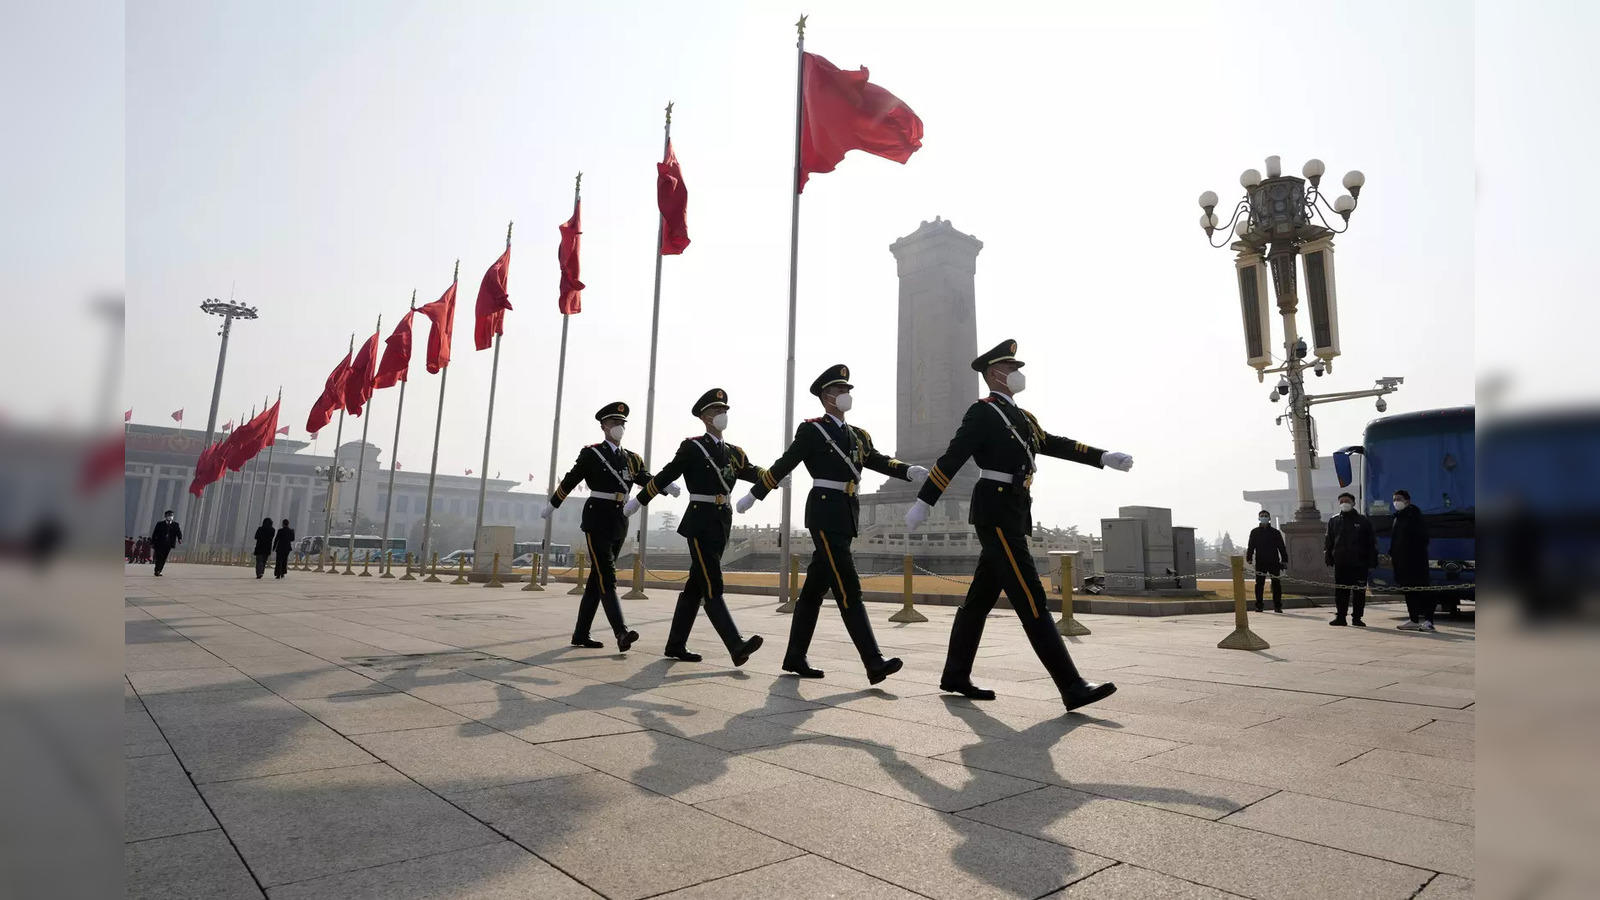 india china: World's largest Army, Navy: How China has ramped up